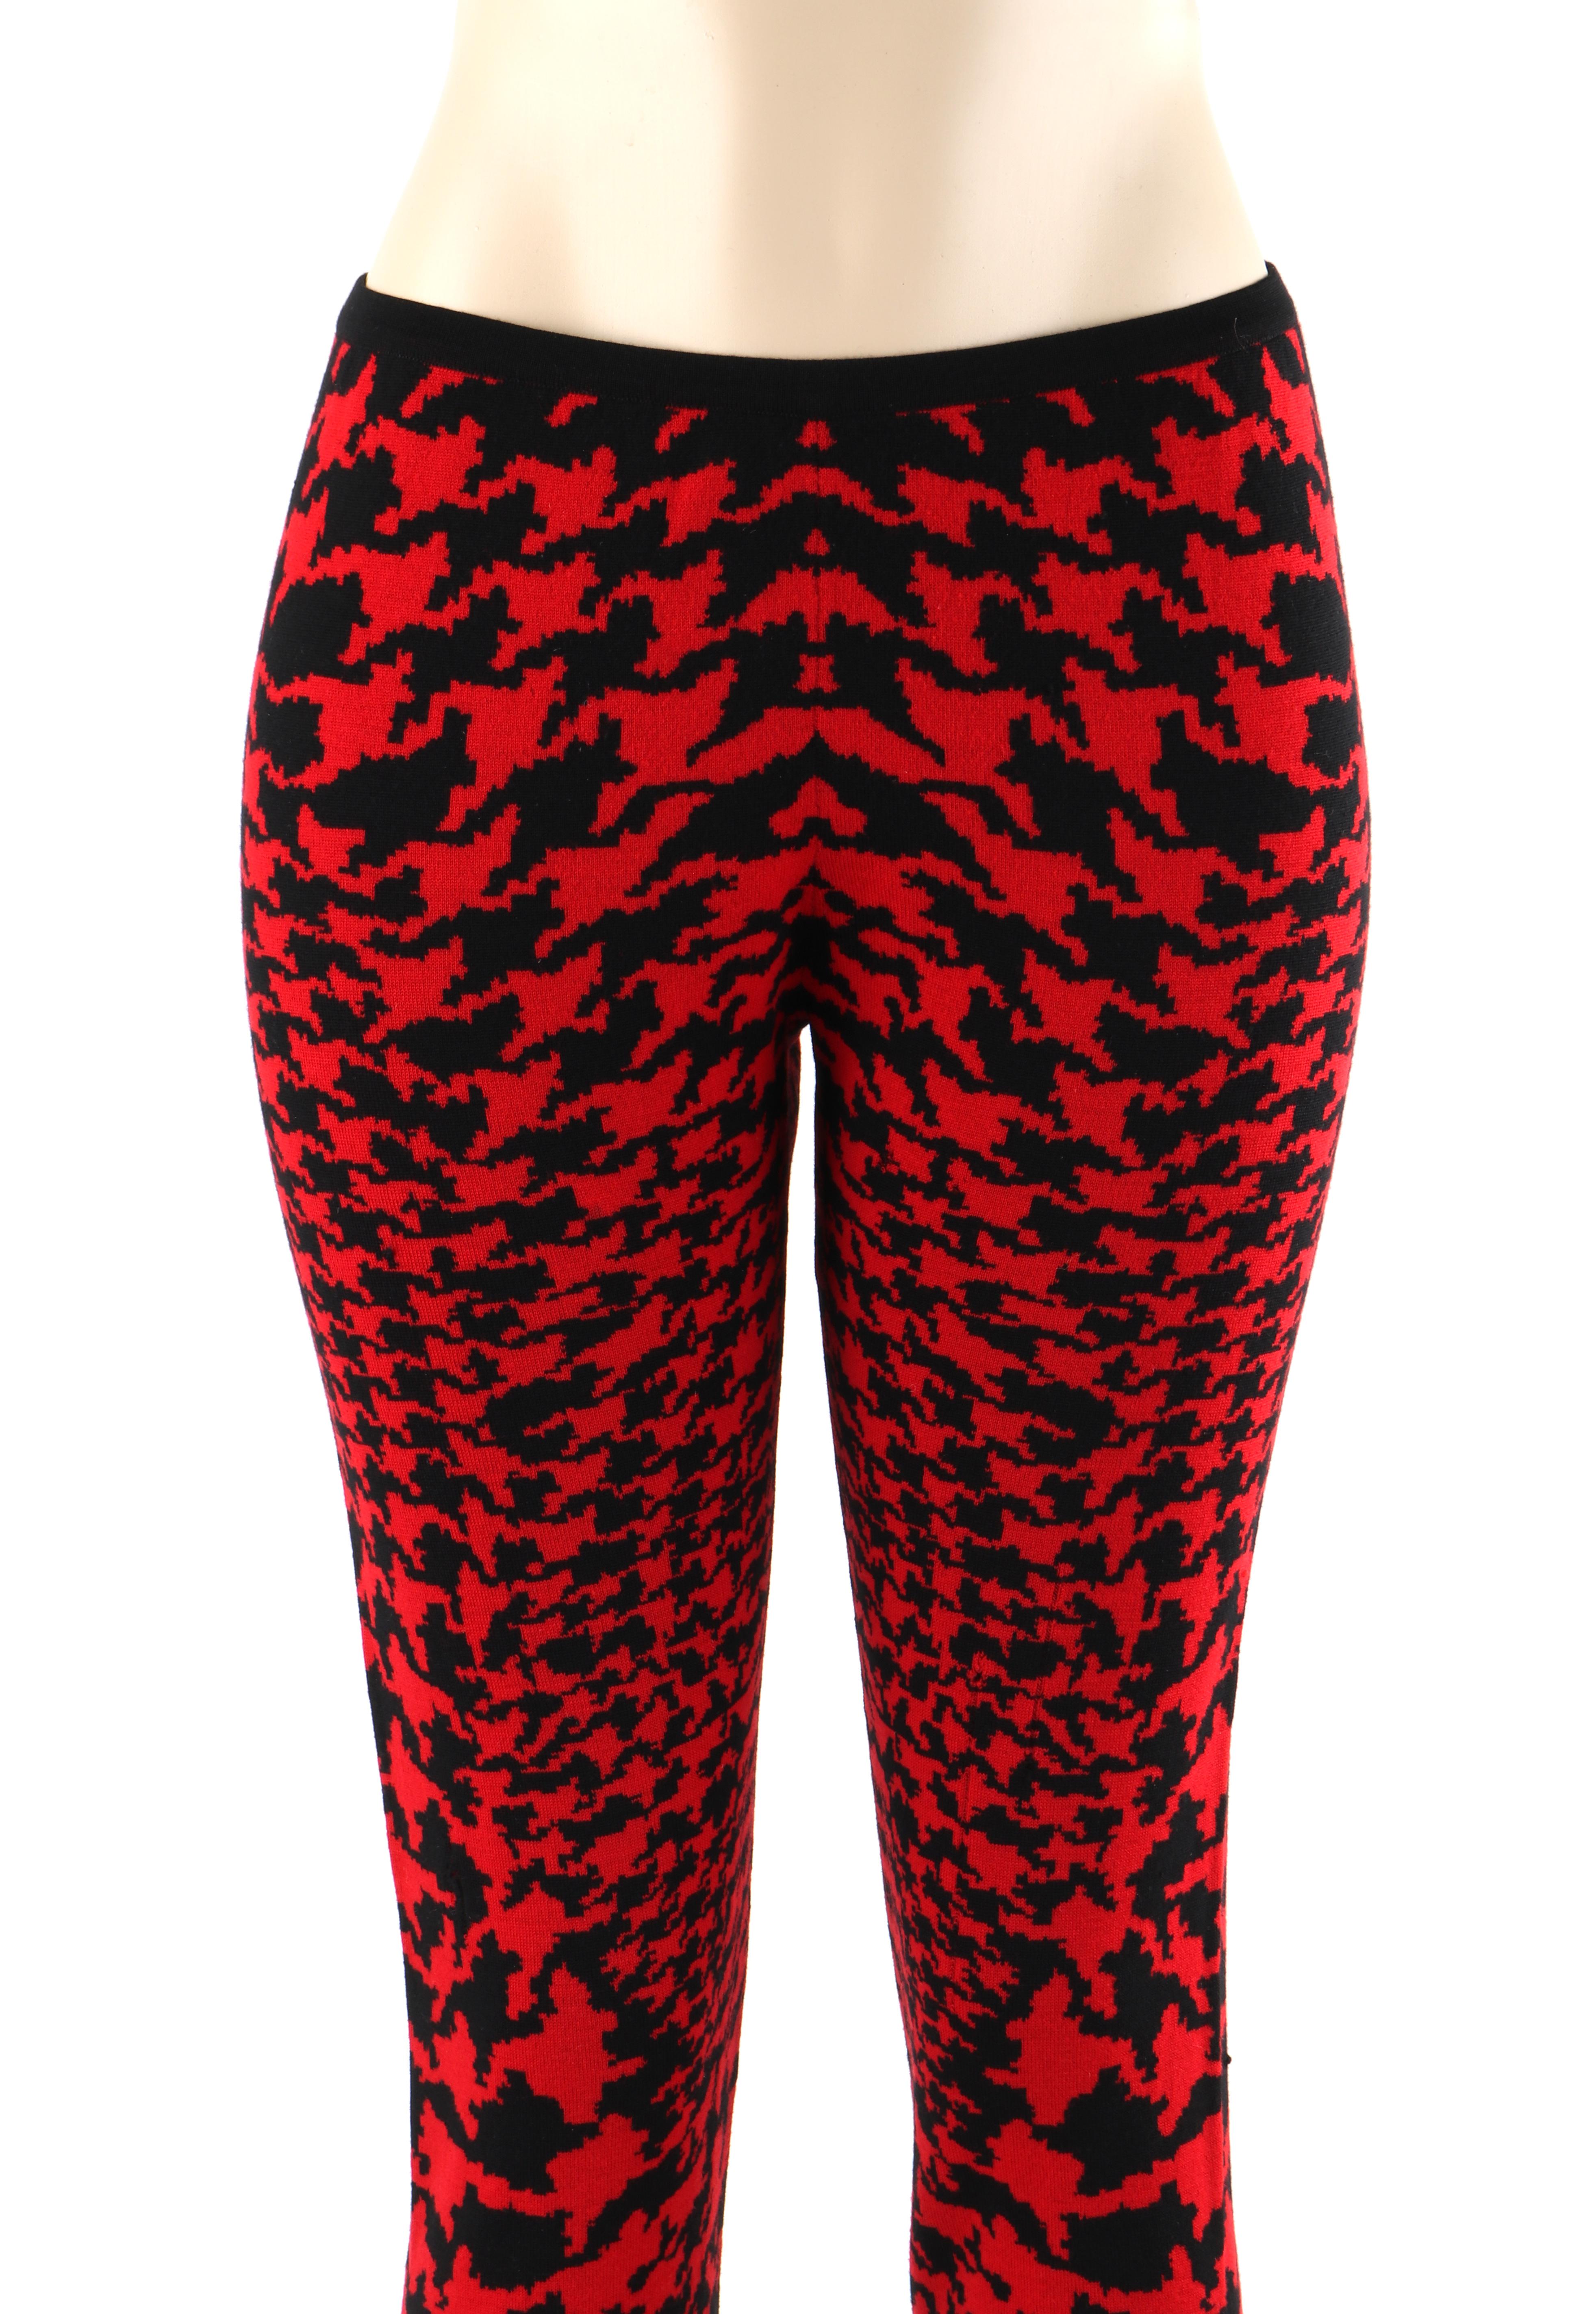 ALEXANDER McQUEEN A/W 2009 “The Horn Of Plenty” Dogtooth Knit Stretch Legging

Brand / Manufacturer: Alexander McQueen
Collection: A/W 2009 “The Horn Of Plenty”
Designer: Alexander McQueen
Style: Legging
Color(s): Red and Black
Lined: No
Marked